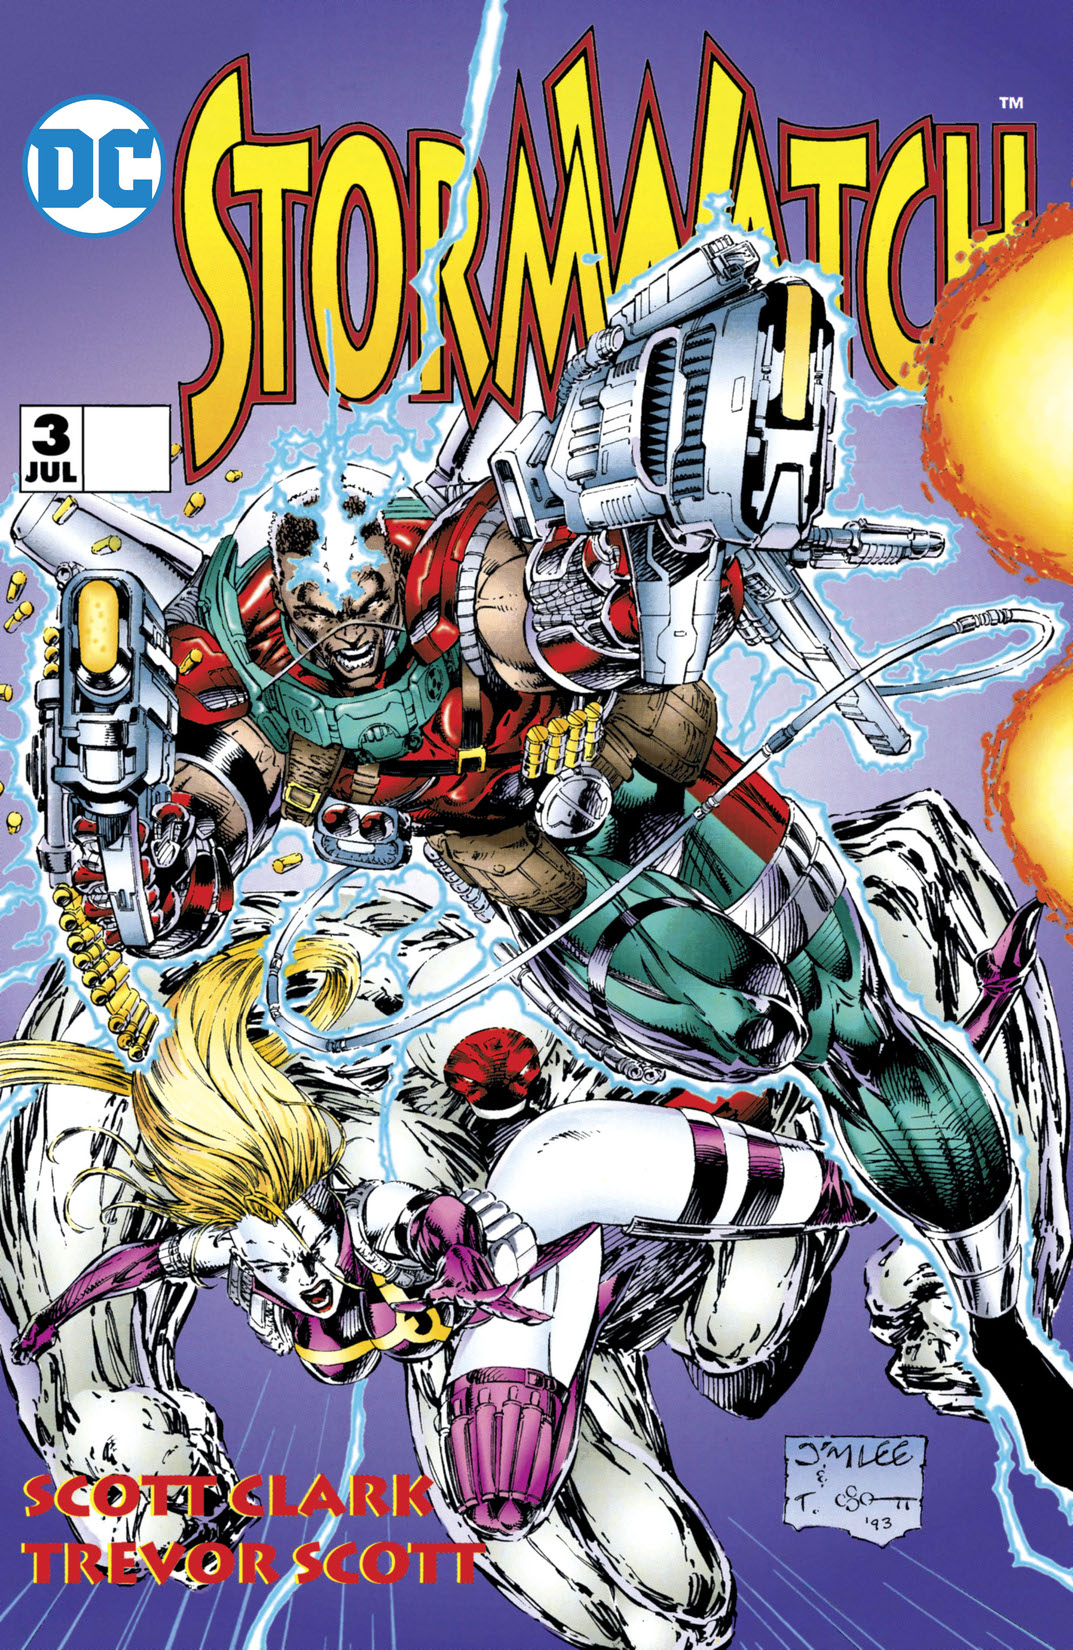 Stormwatch (1993-1997) #3 preview images